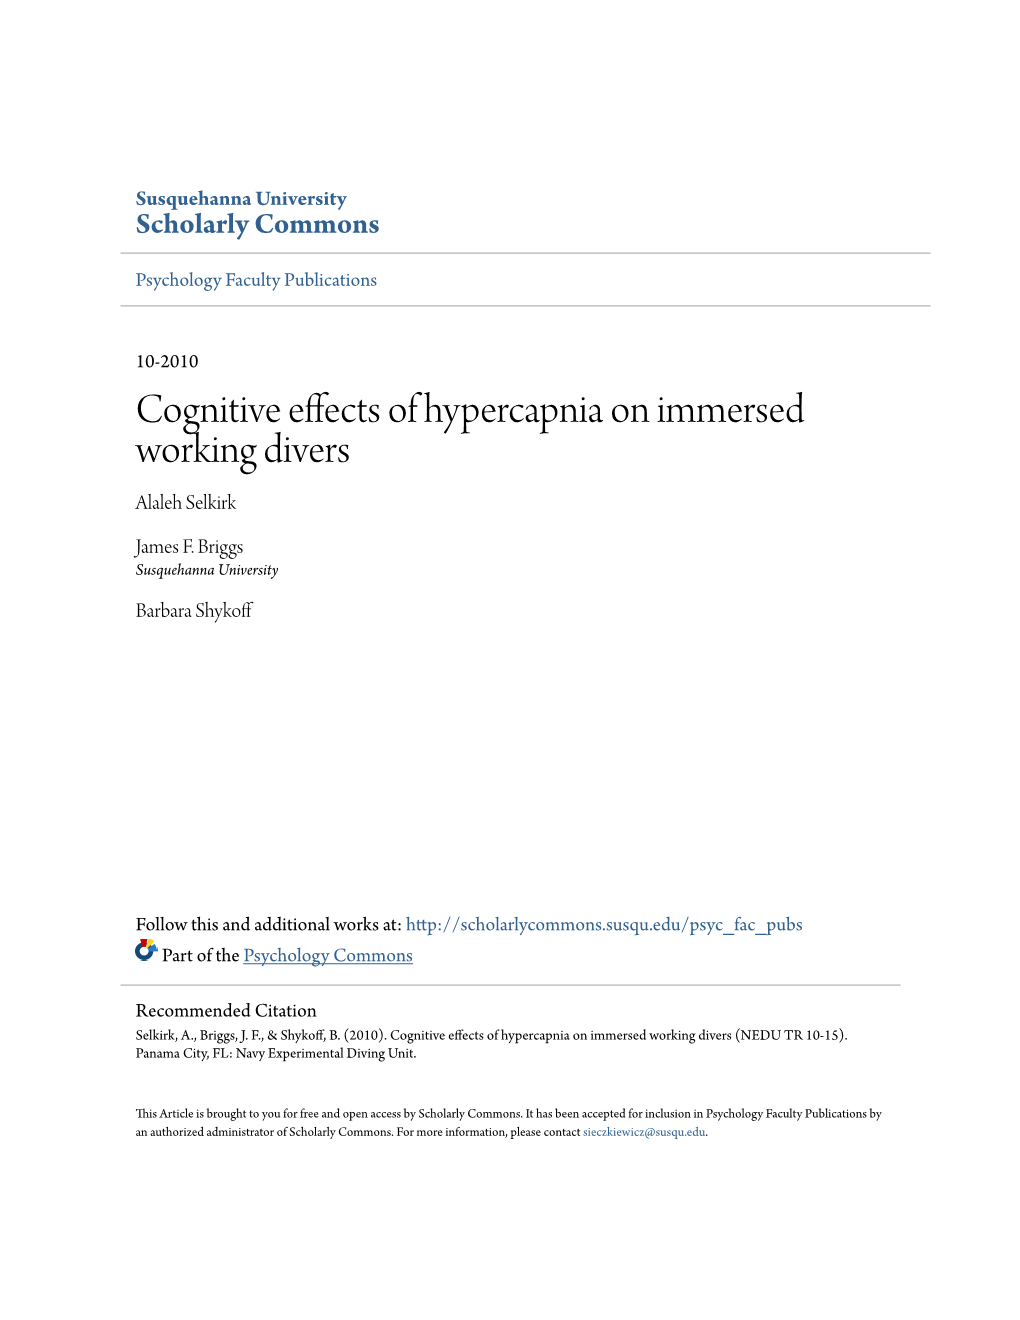 Cognitive Effects of Hypercapnia on Immersed Working Divers Alaleh Selkirk